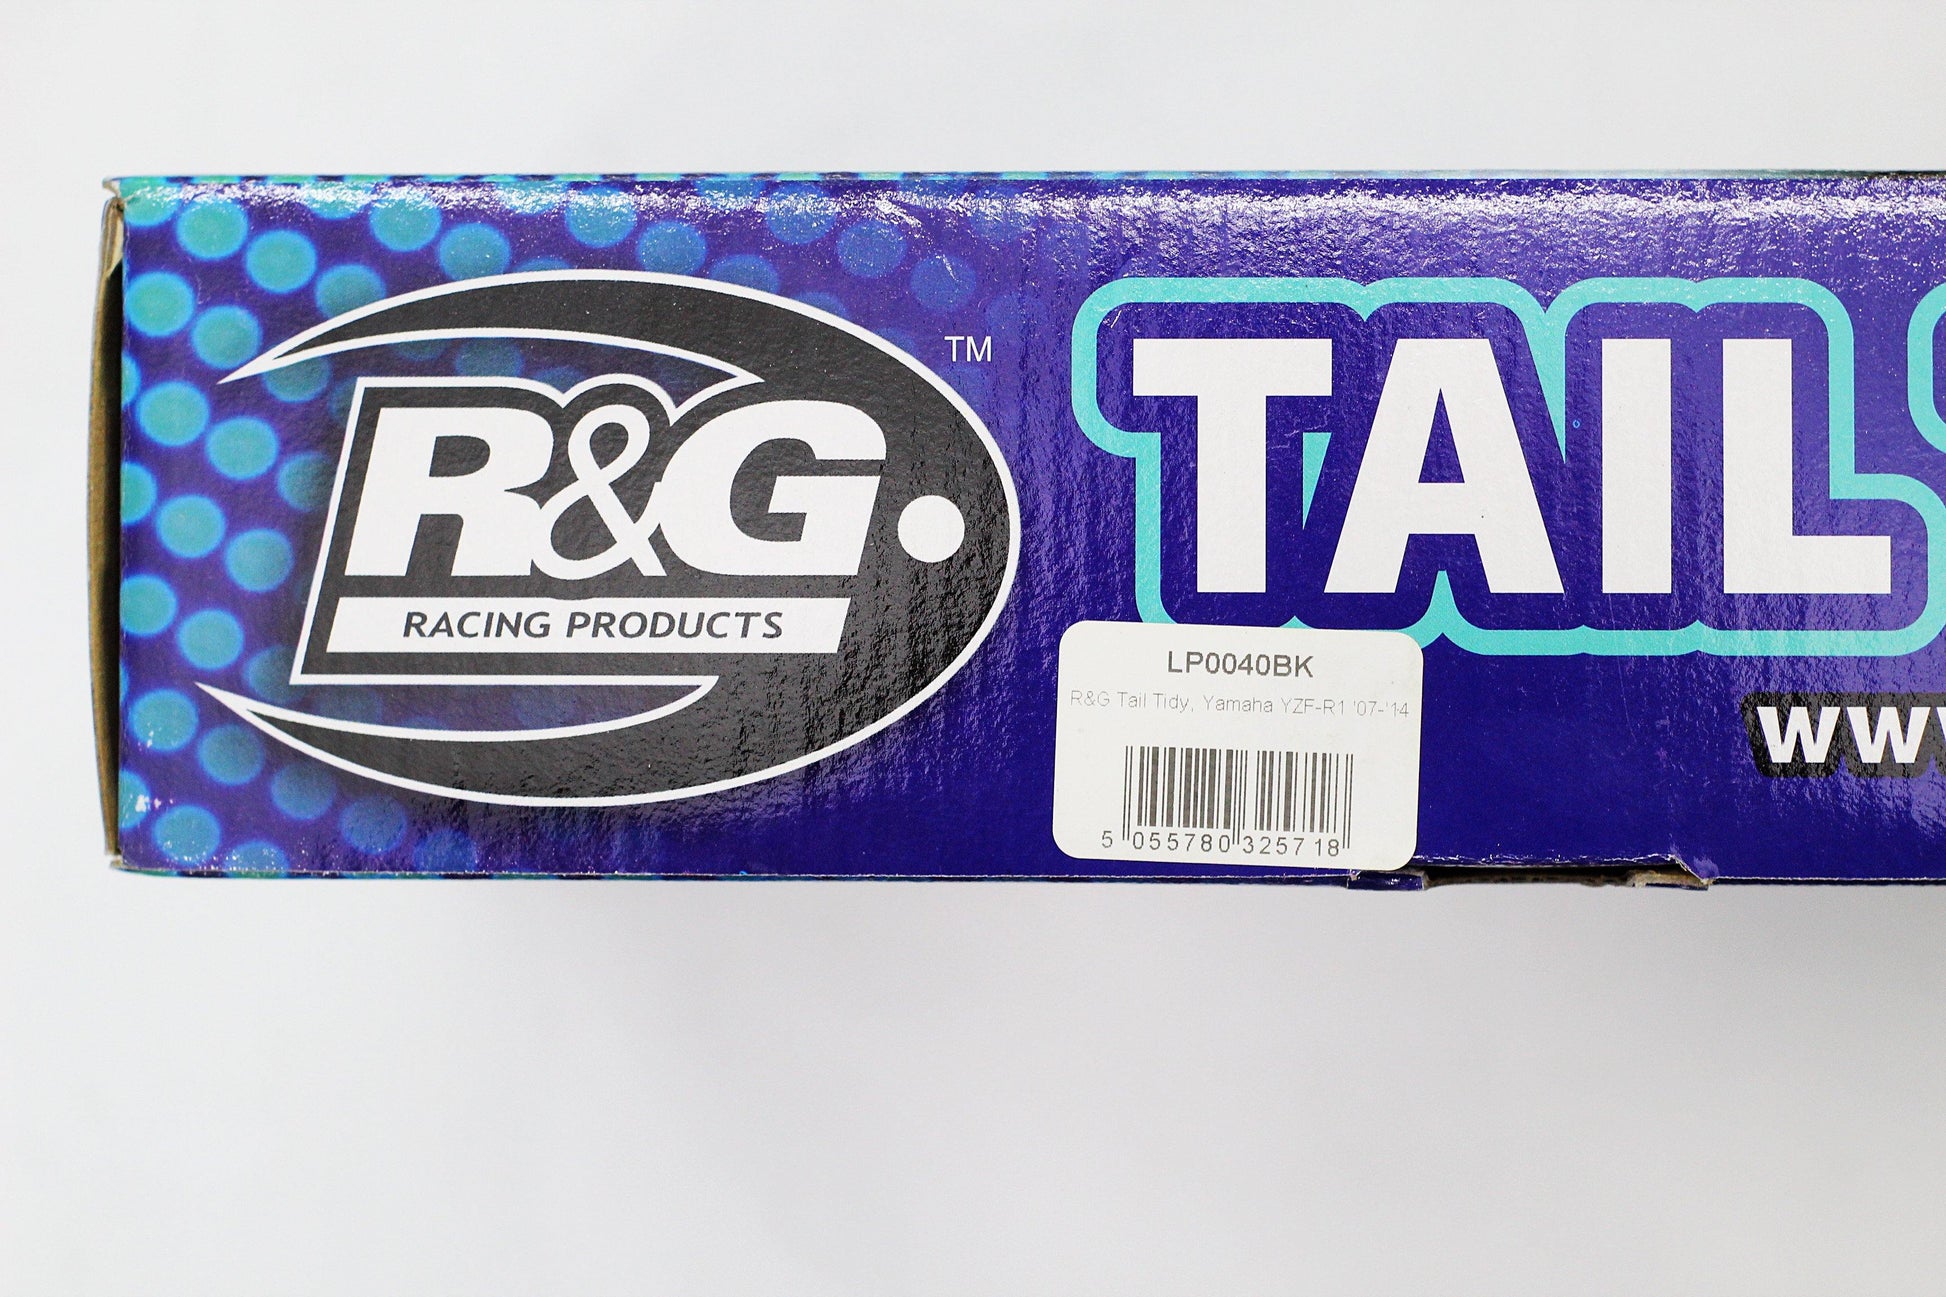 R&G Tail Tidy fits for Yamaha YZF-R1 ('07-'14) - Durian Bikers